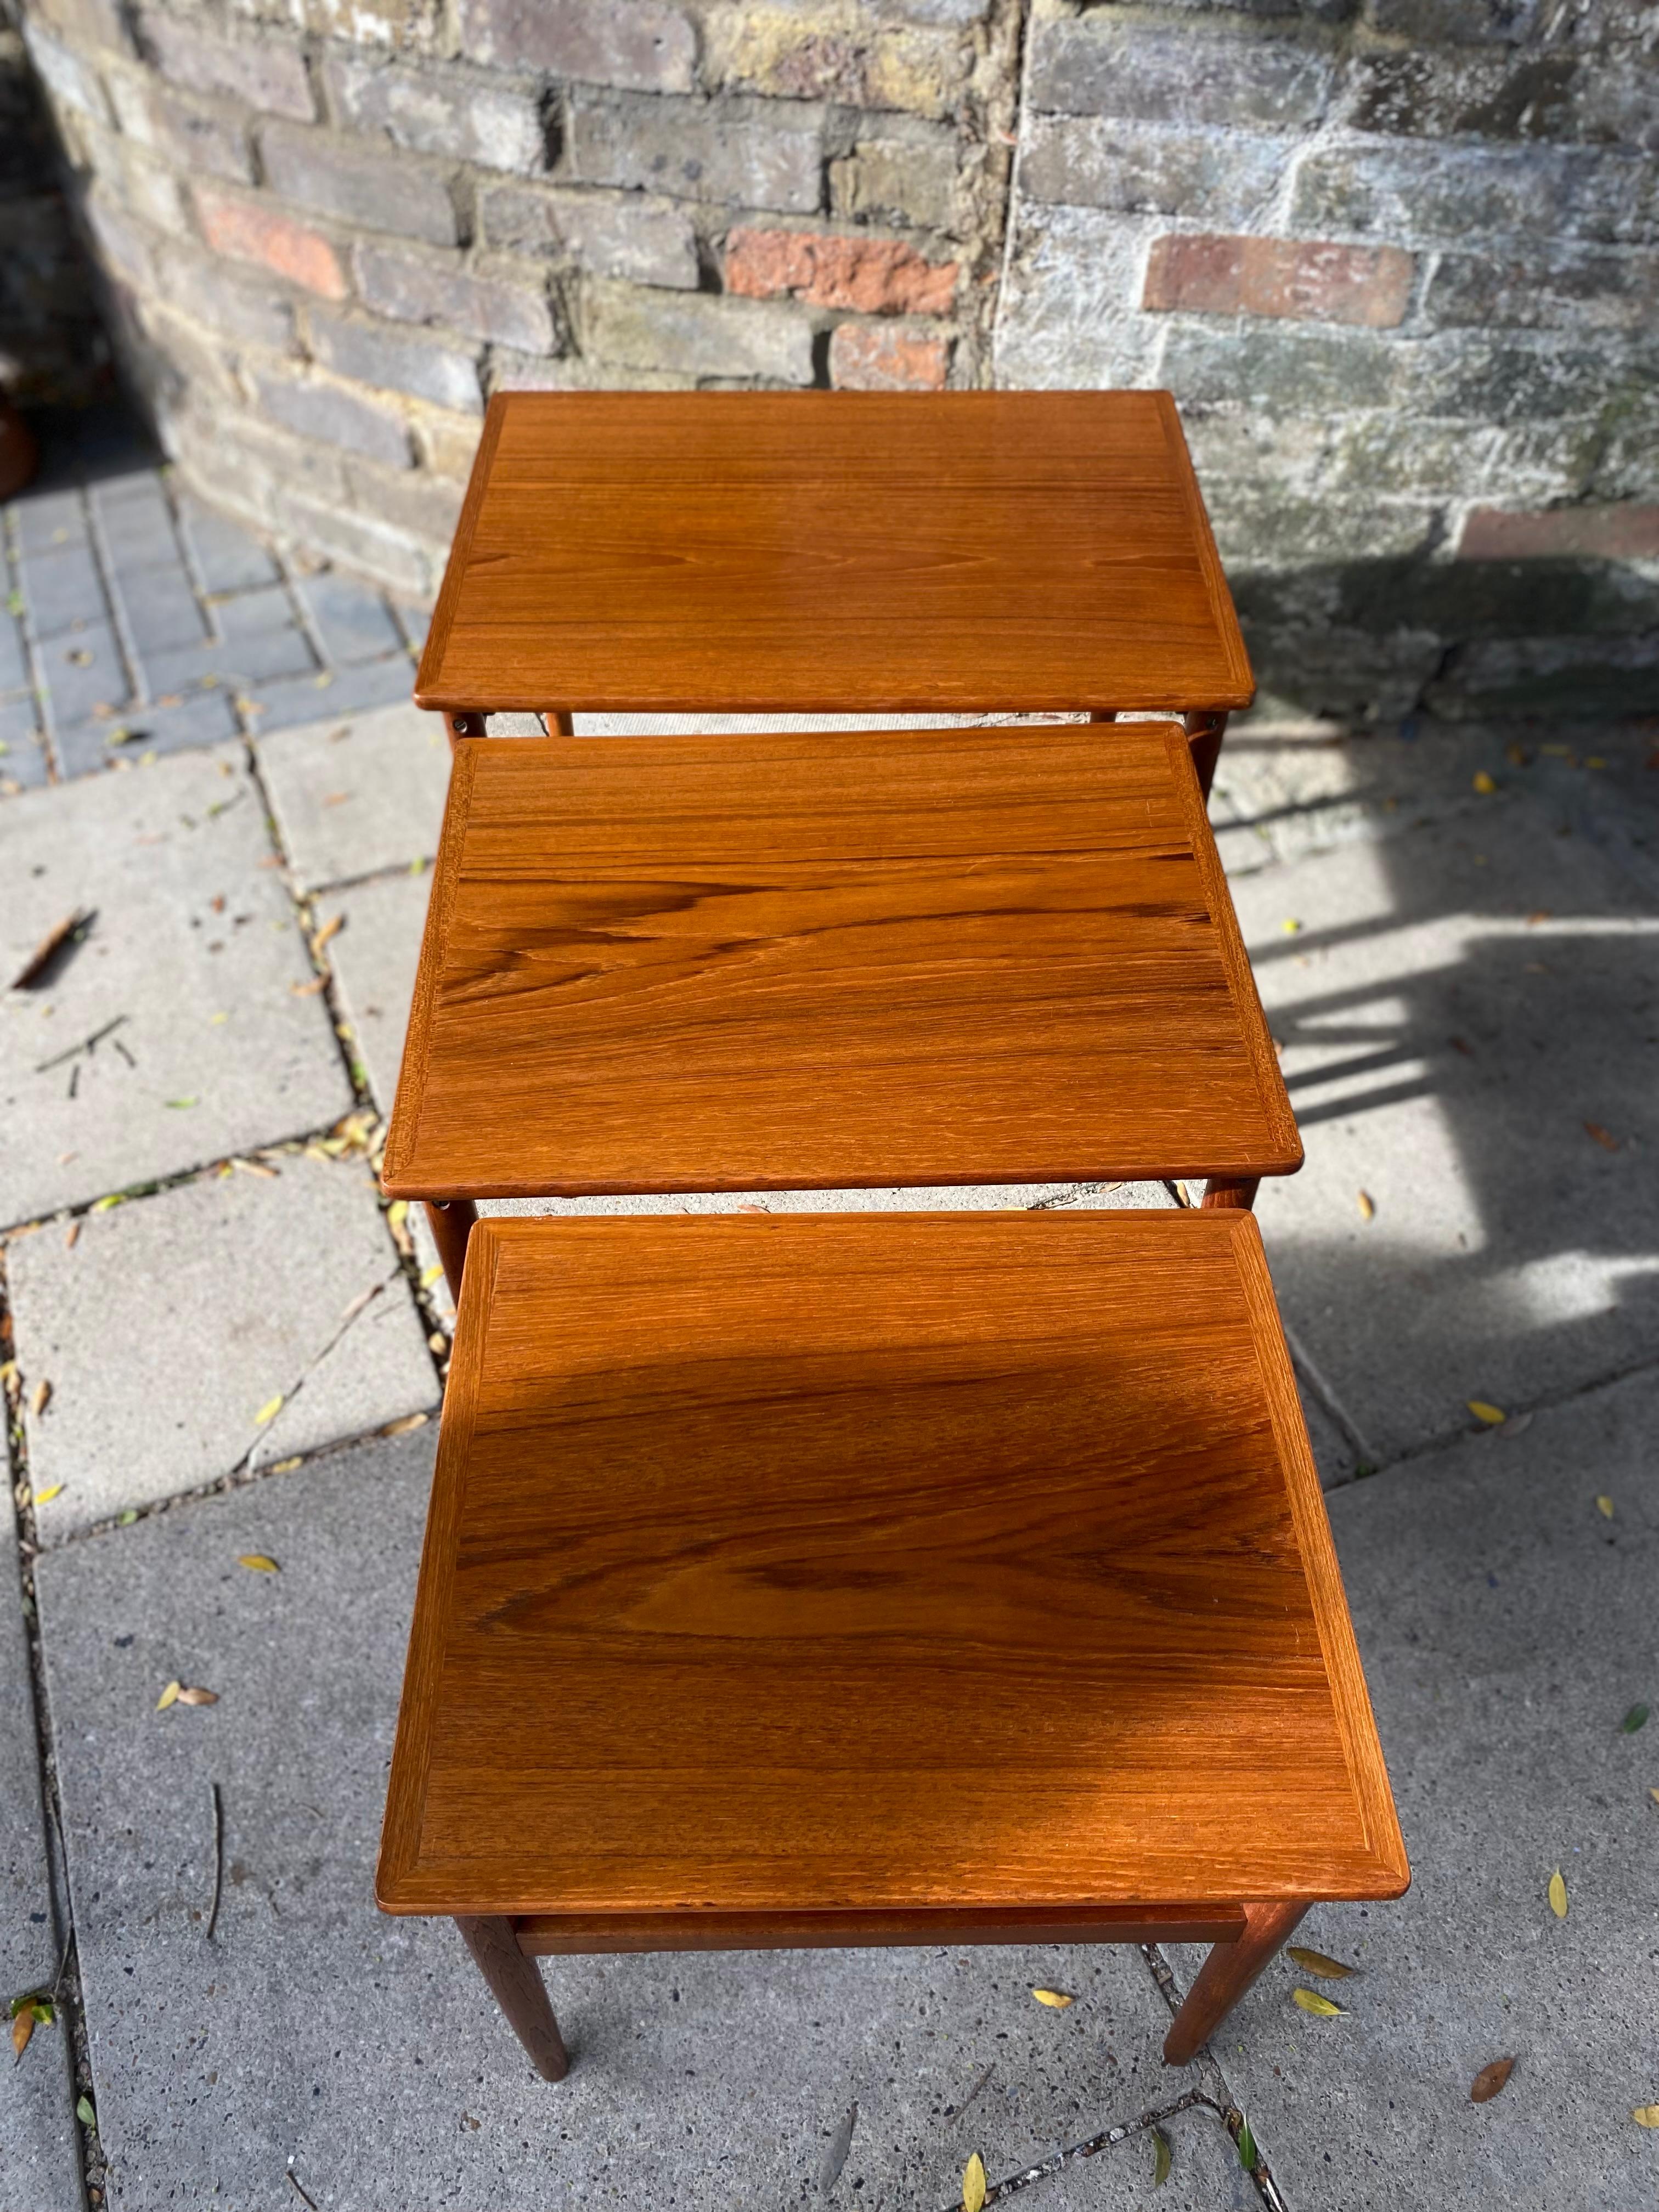 Mid-Century Teak Nest of Tables By Peter Brink for BR Gelsted, Denmark, C. 1960s For Sale 10